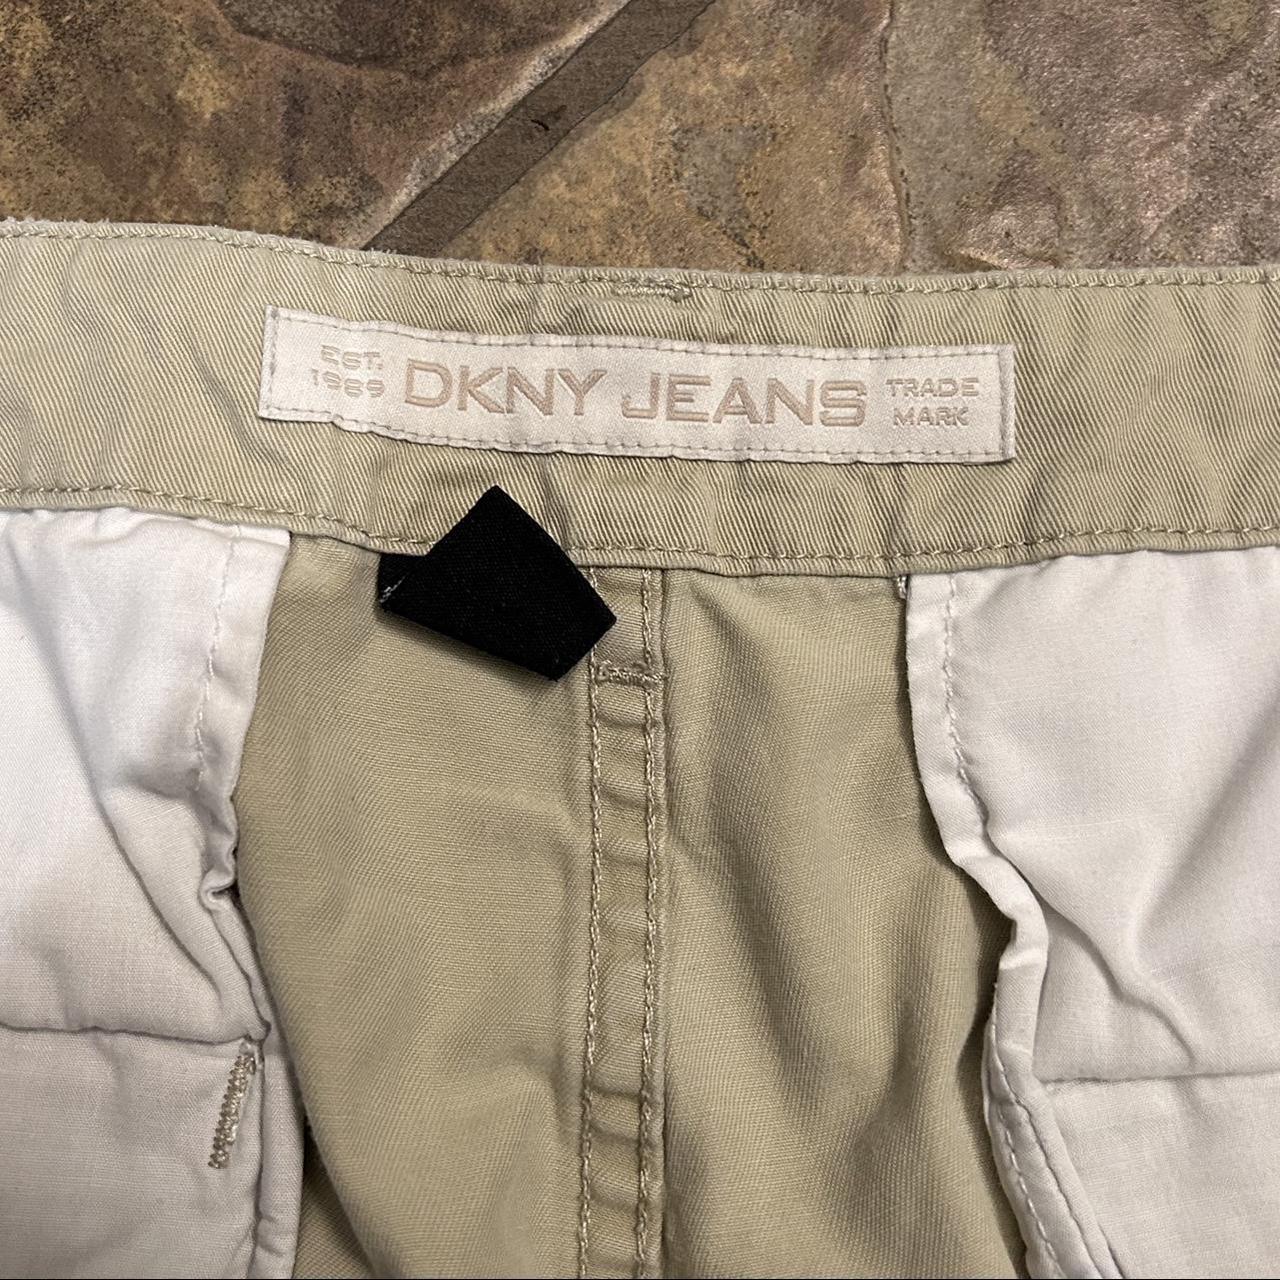 DKNY Men's Cream and White Trousers | Depop